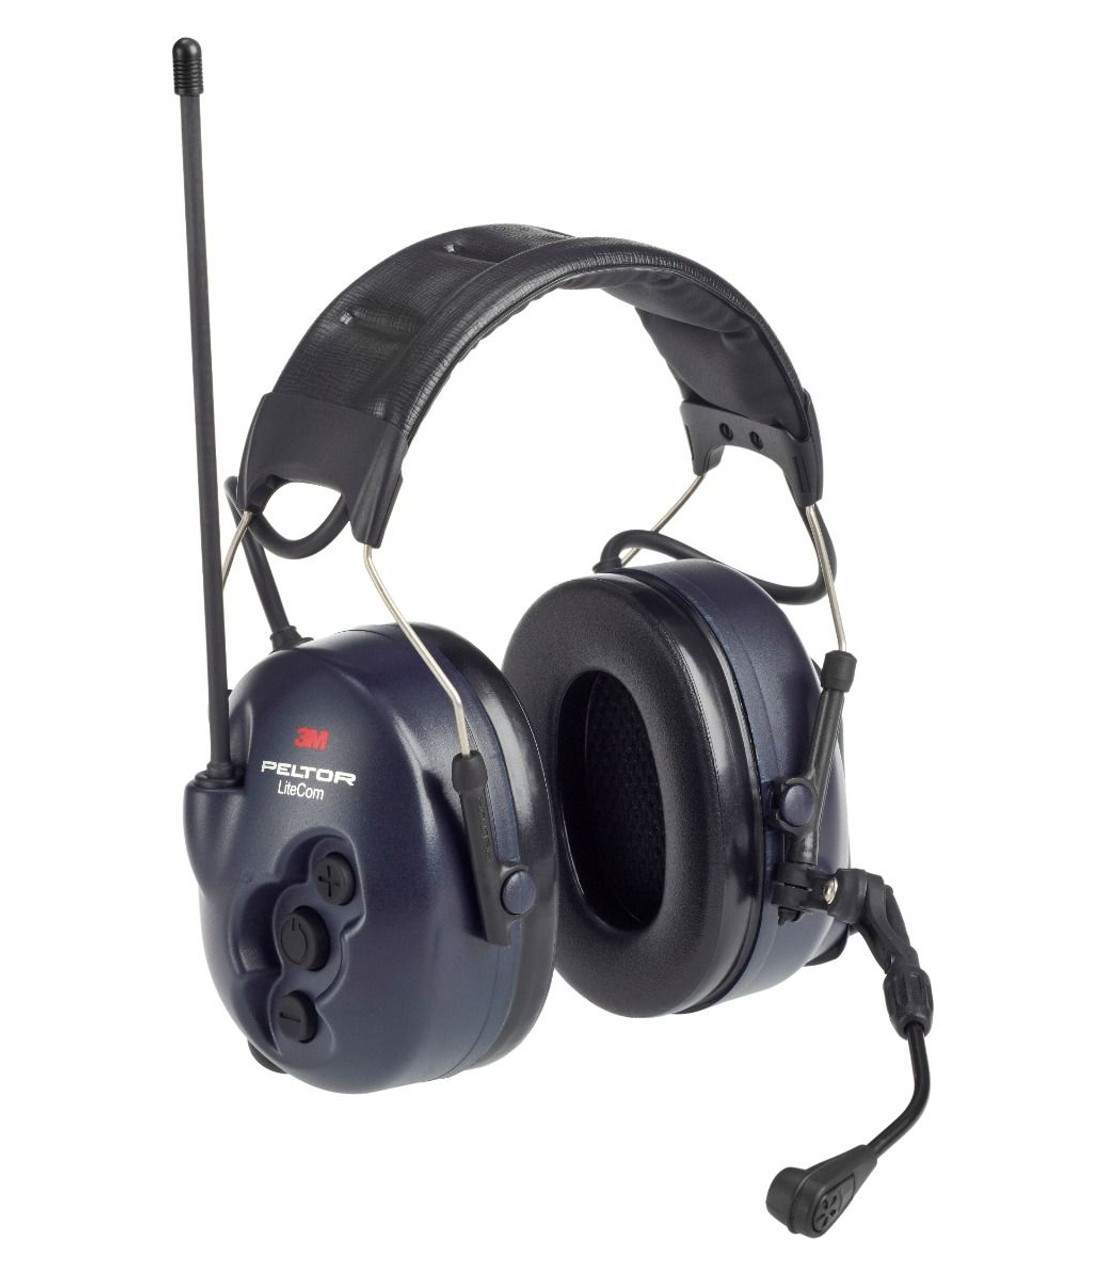 3M MT53H7A4602-NA PELTOR LiteCom 446 Headset Industrial Safety Products